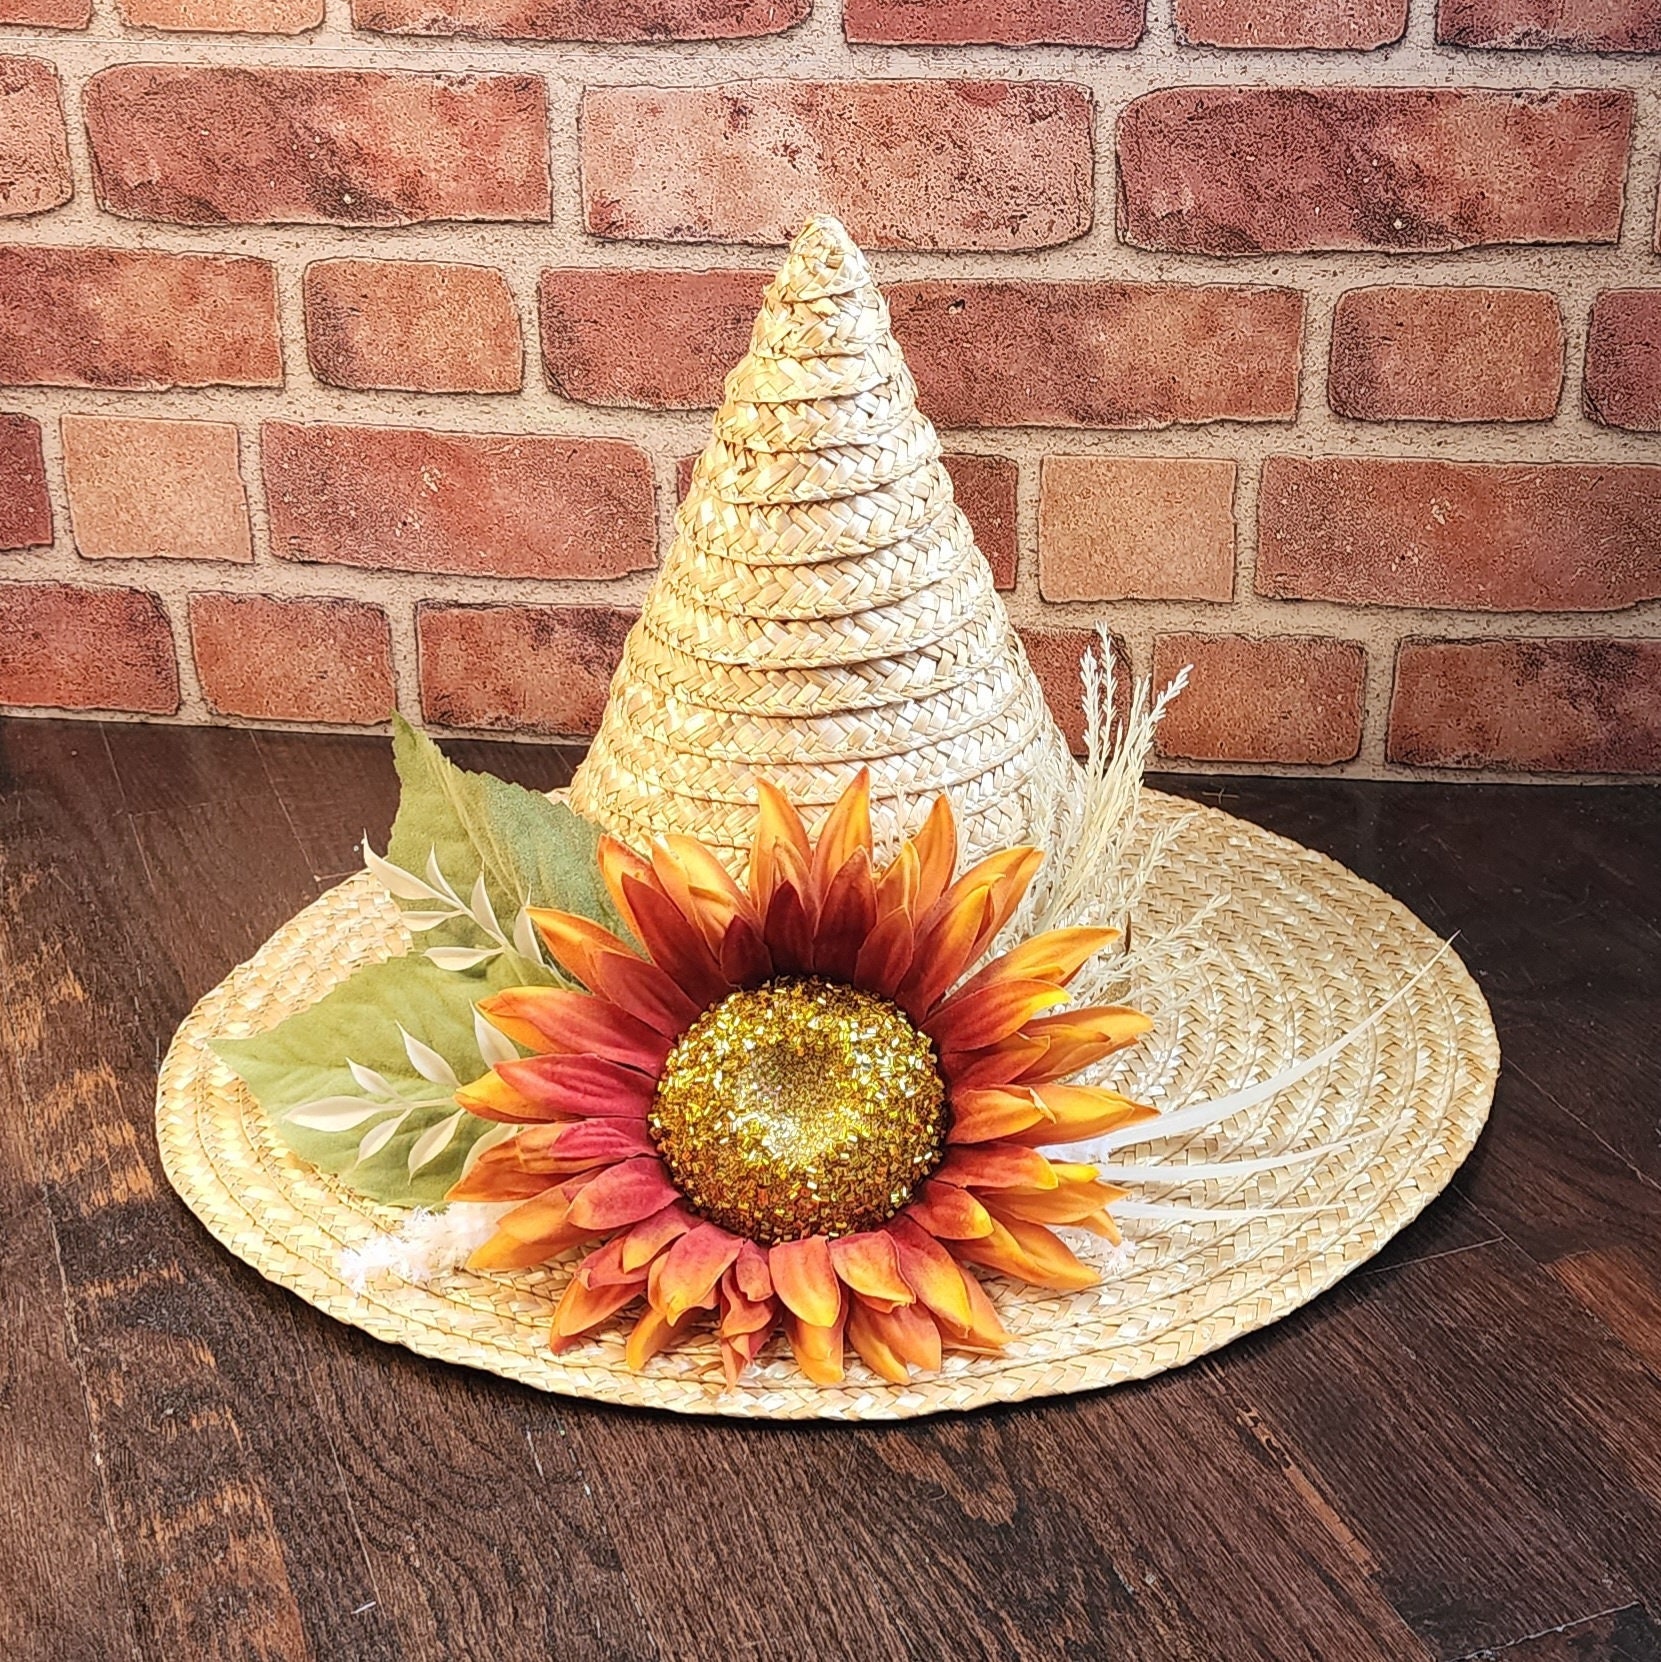 Budget-Wise GROOVY GLAM Handmade Wide Brim Straw Hat with Sunflowers  Detail, sunflower straw cover